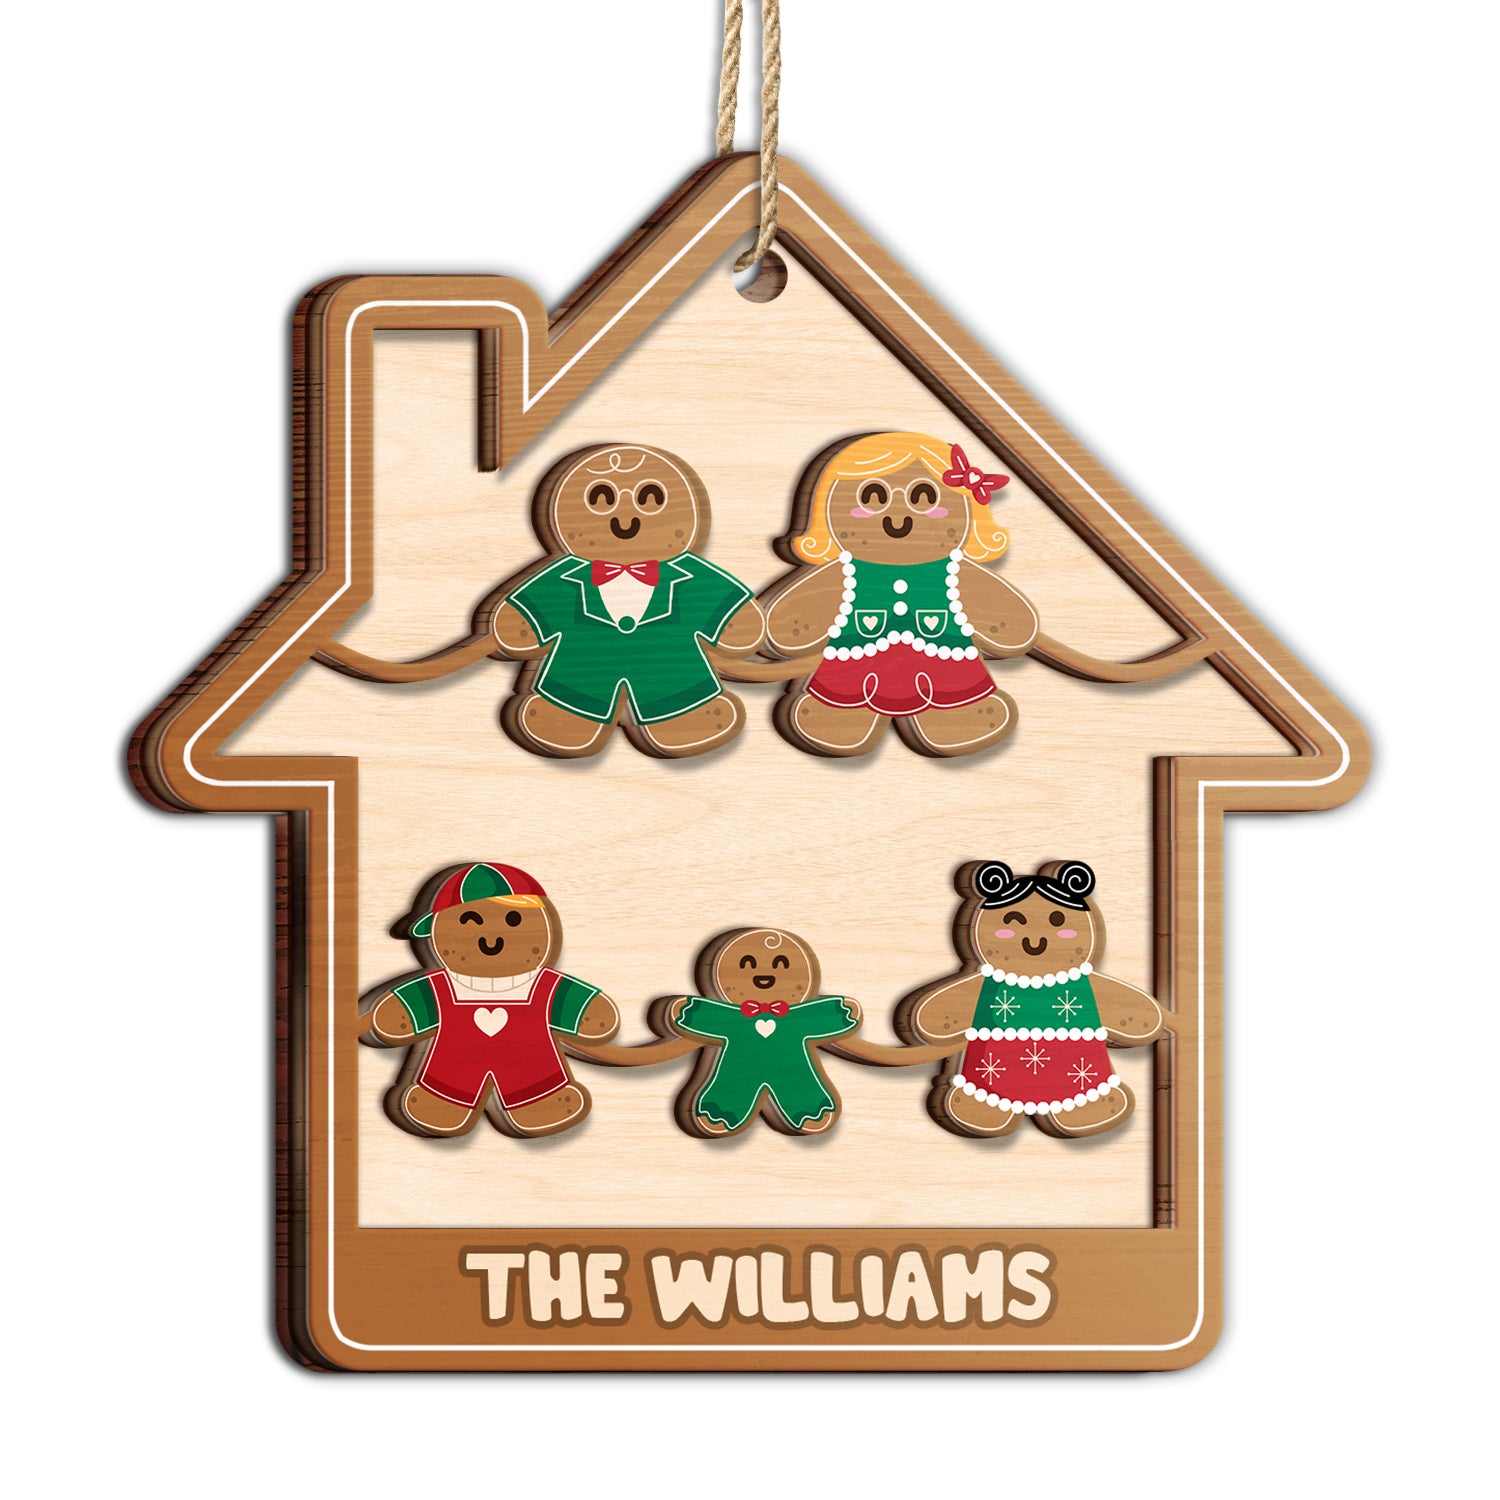 Gingerbread Cookies Pet Family - Christmas, Gift For Family - Personalized 2-Layered Wooden Ornament